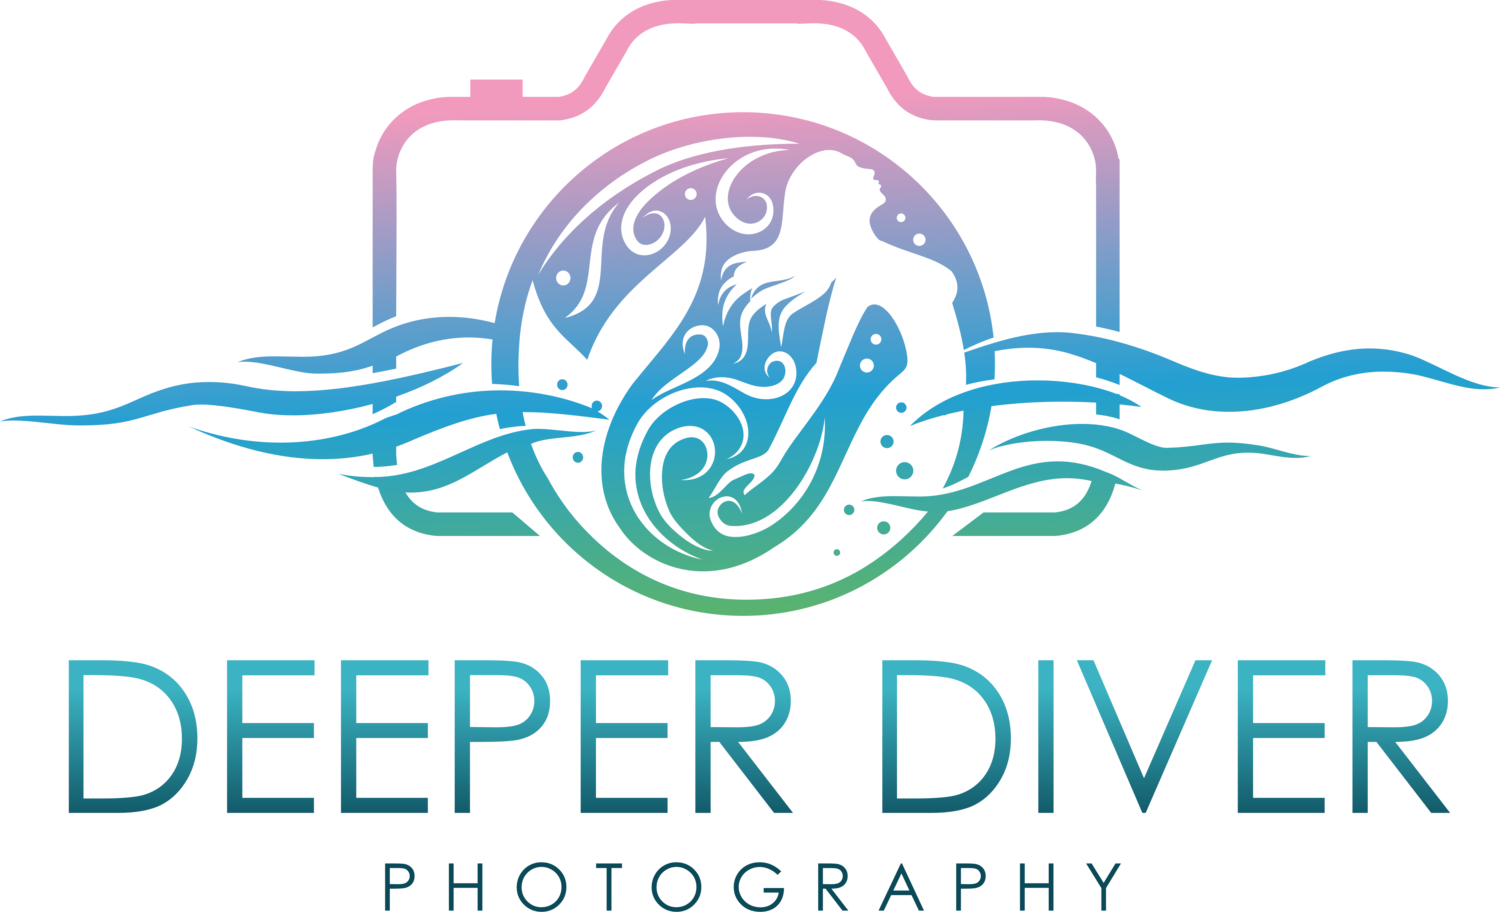 Deeper Diver Photography